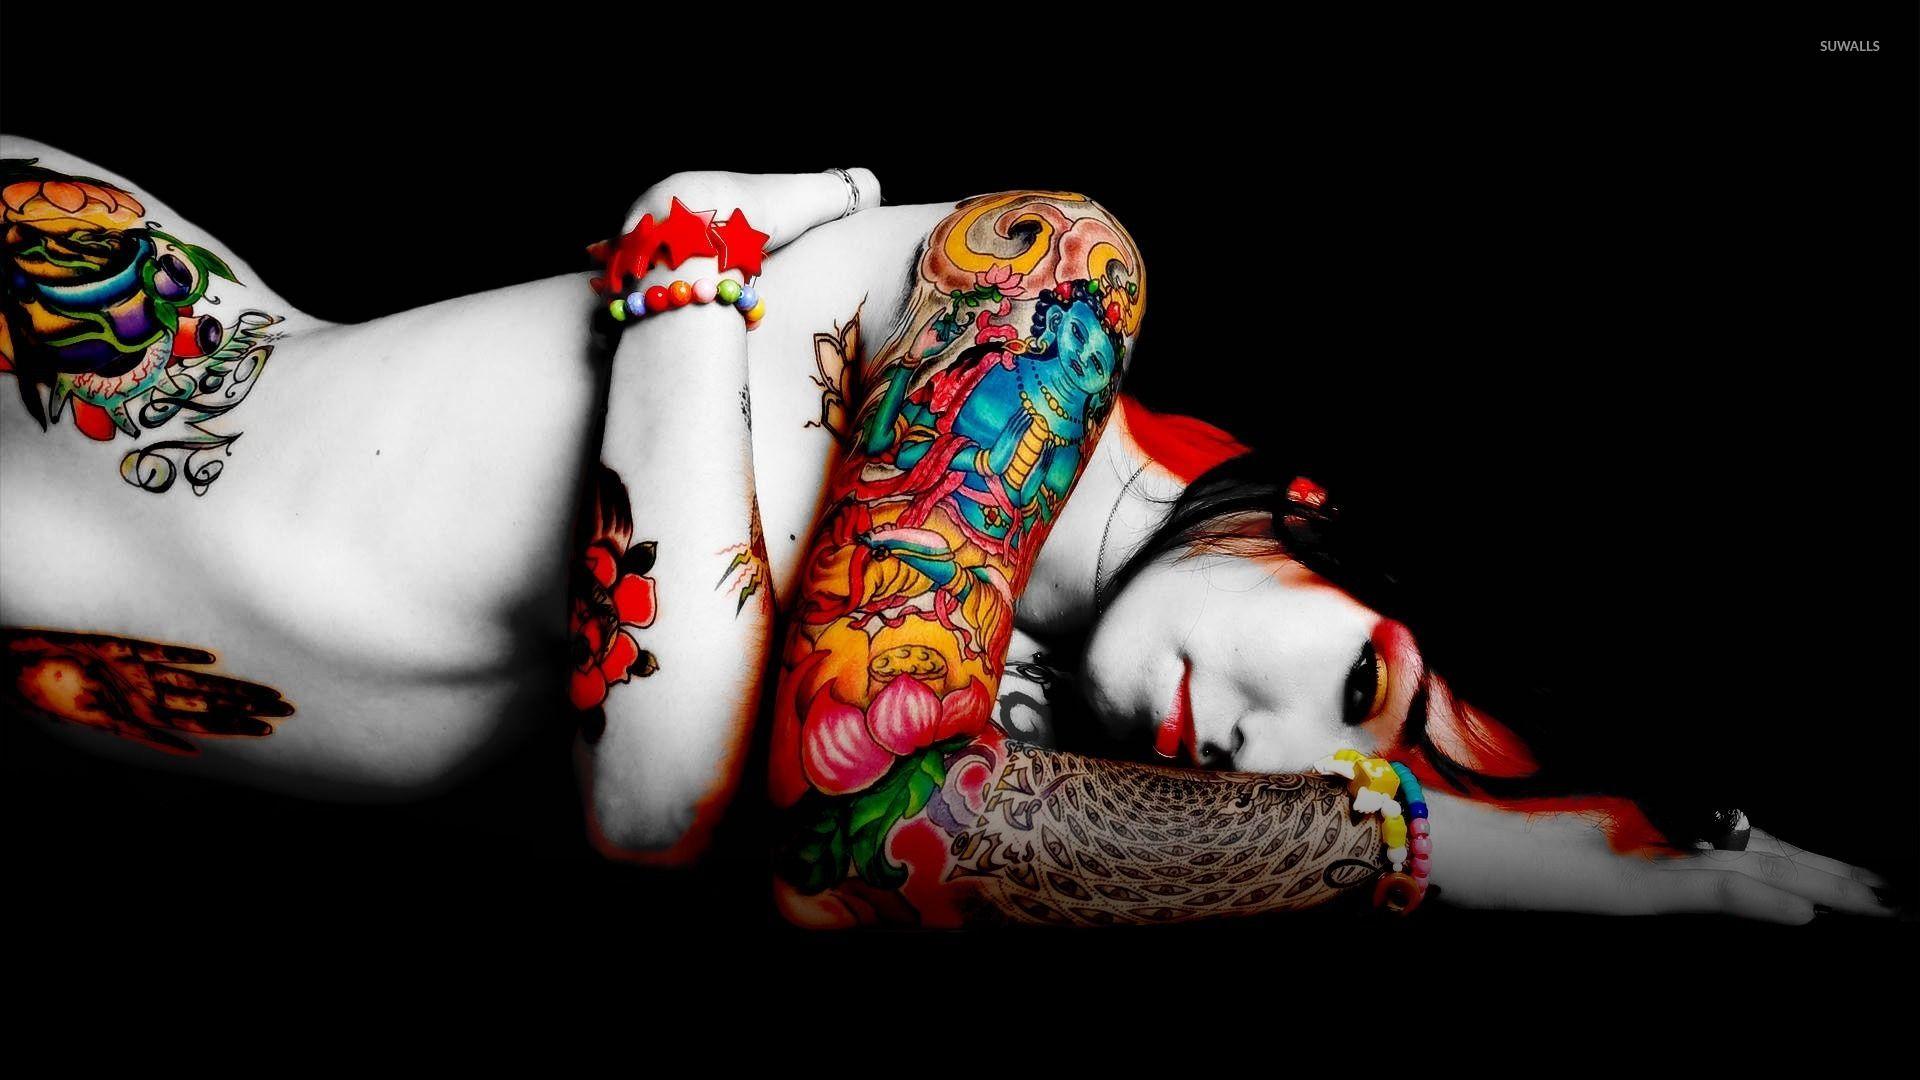 Woman with colorful tattoos wallpaper wallpaper